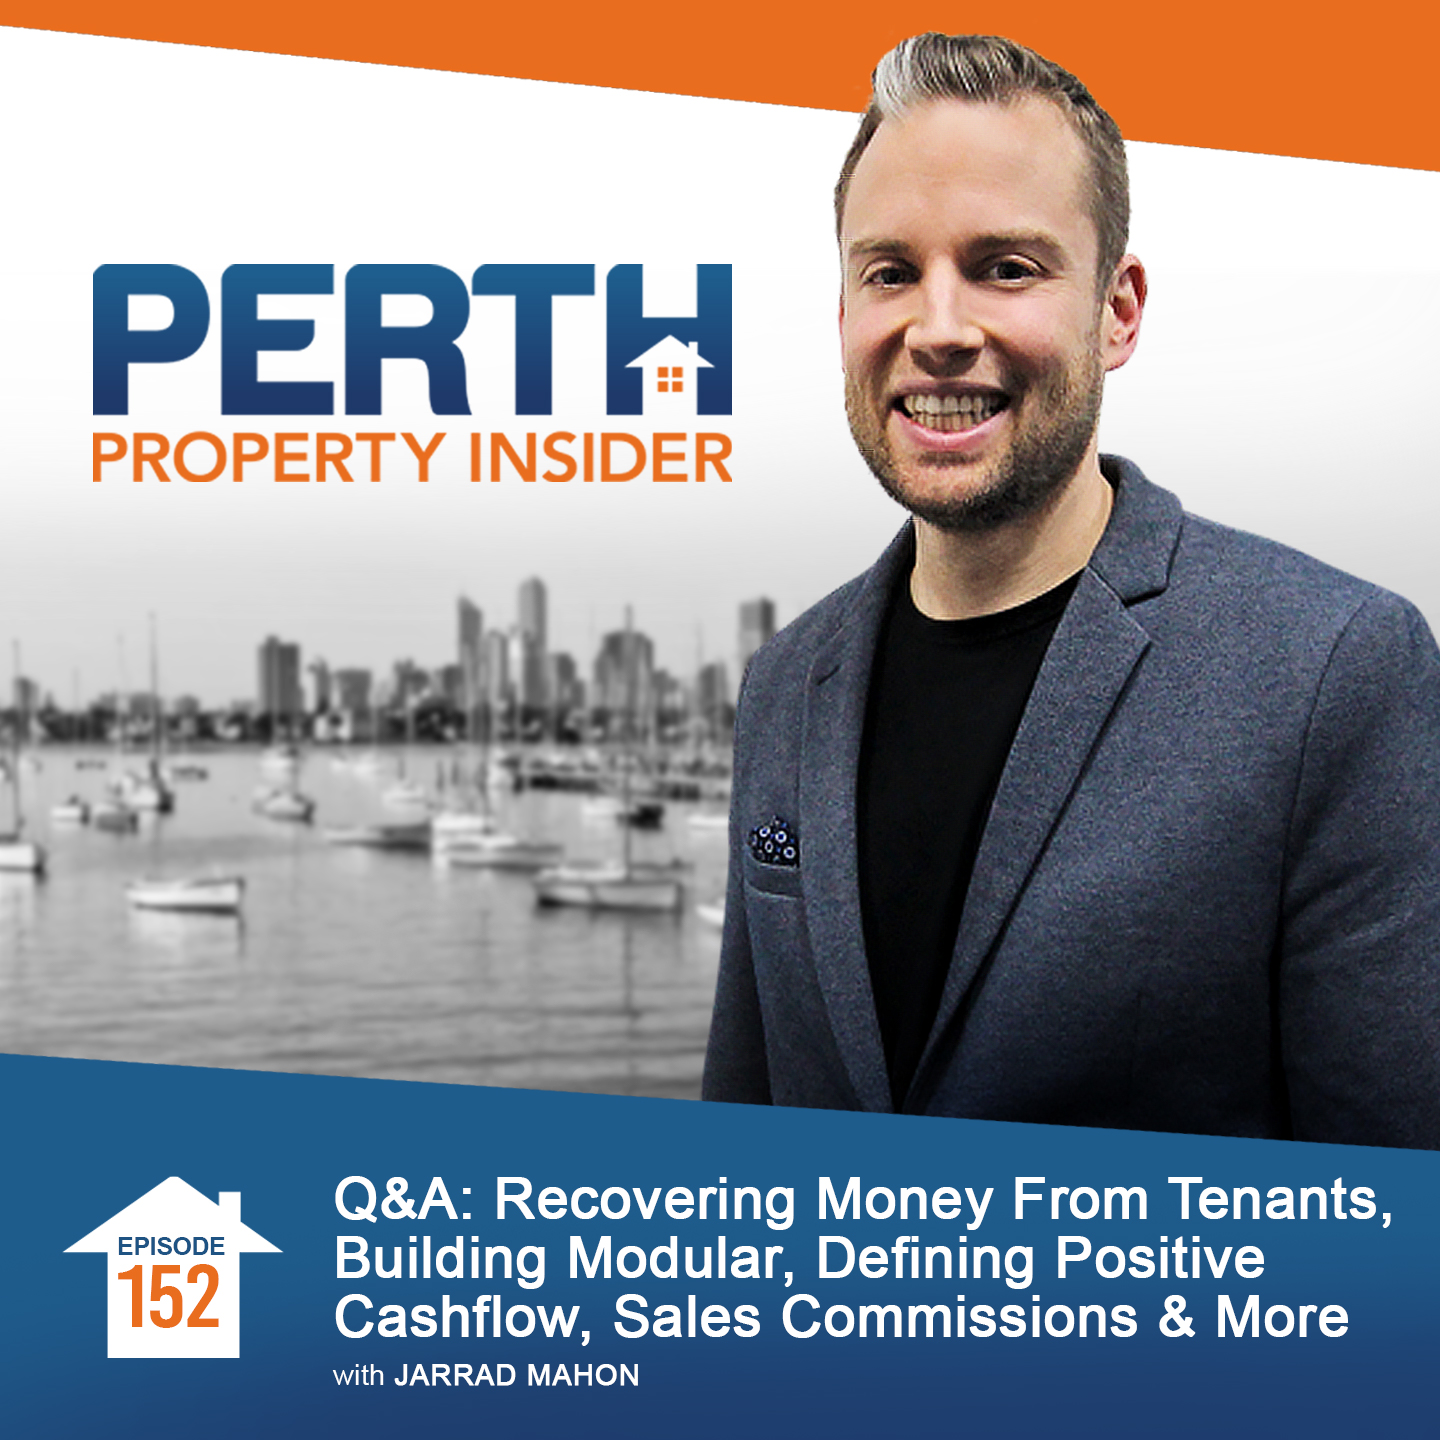 Q&A: Recovering Money From Tenants, Building Modular, Defining Positive Cashflow, Sales Commissions & More